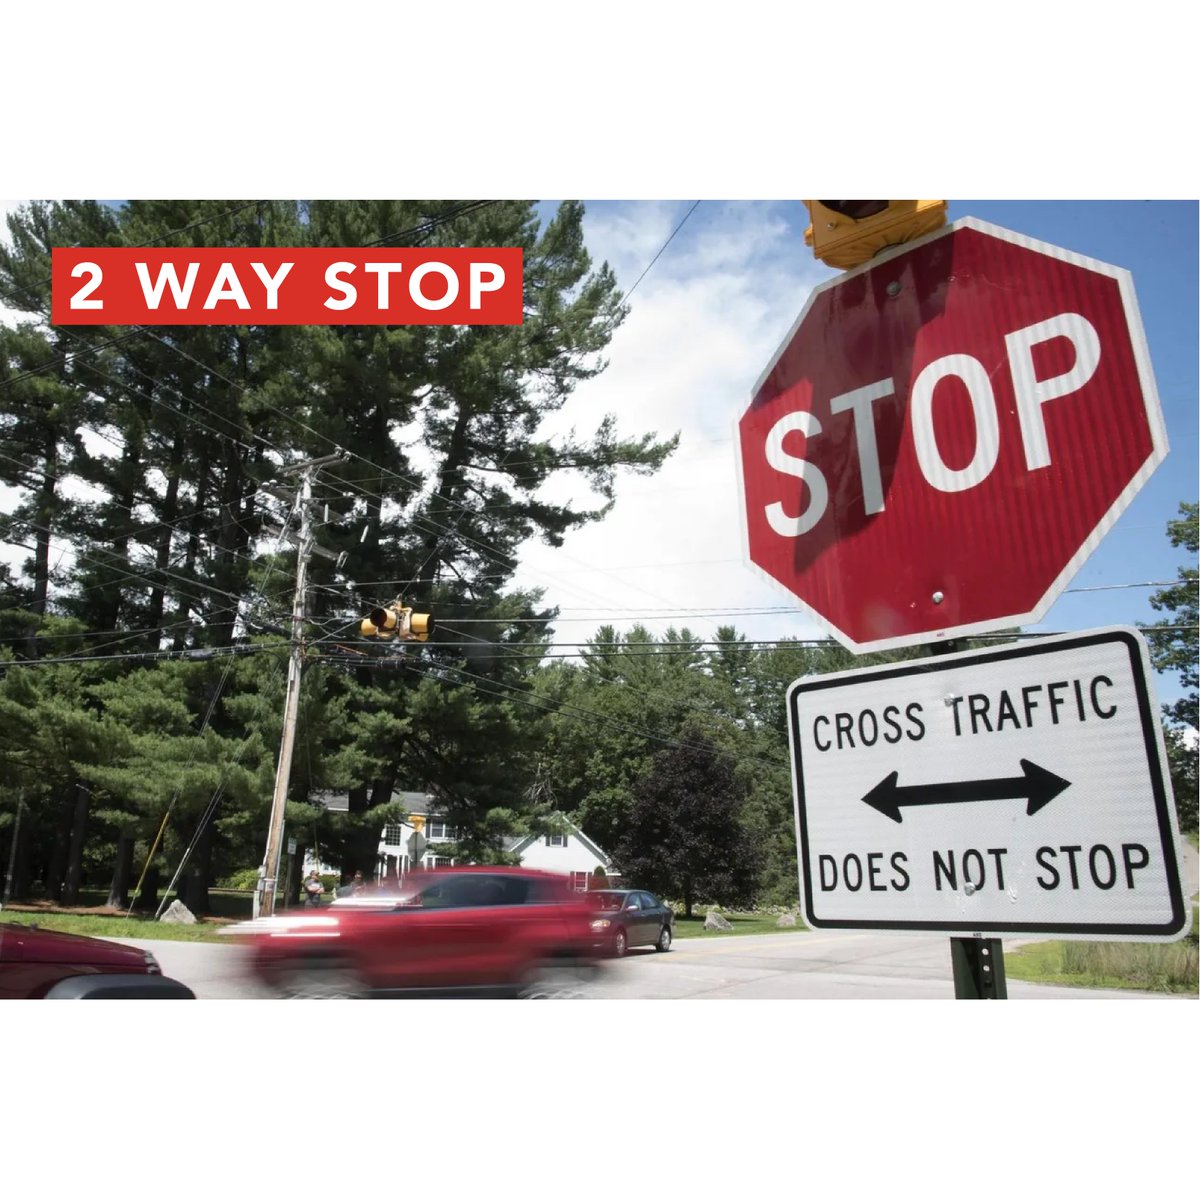 At 2-WAY STOP signs you must first come to a complete stop at the correct stopping position: 1) before the STOP line; 2) before the crosswalk lines or sidewalk; 3) just before entering the intersection.